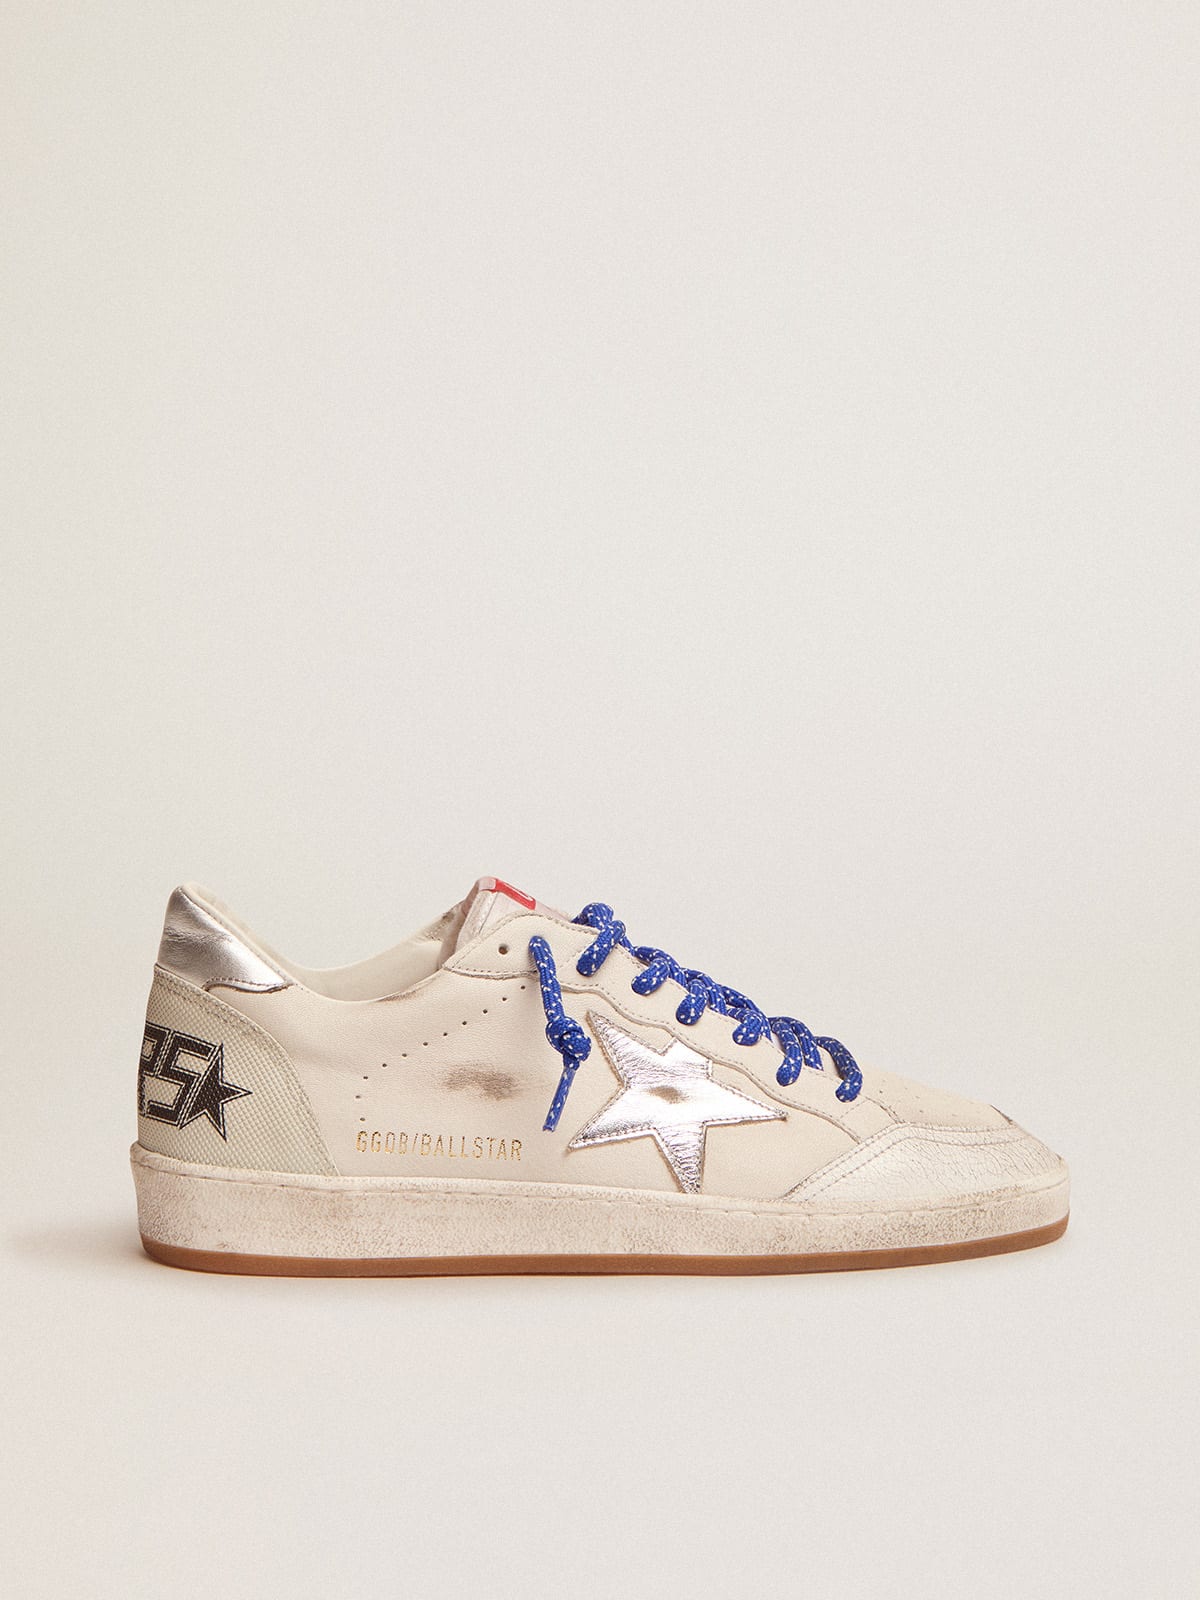 Ball Star LTD sneakers in white nappa leather with silver laminated leather star and heel tab